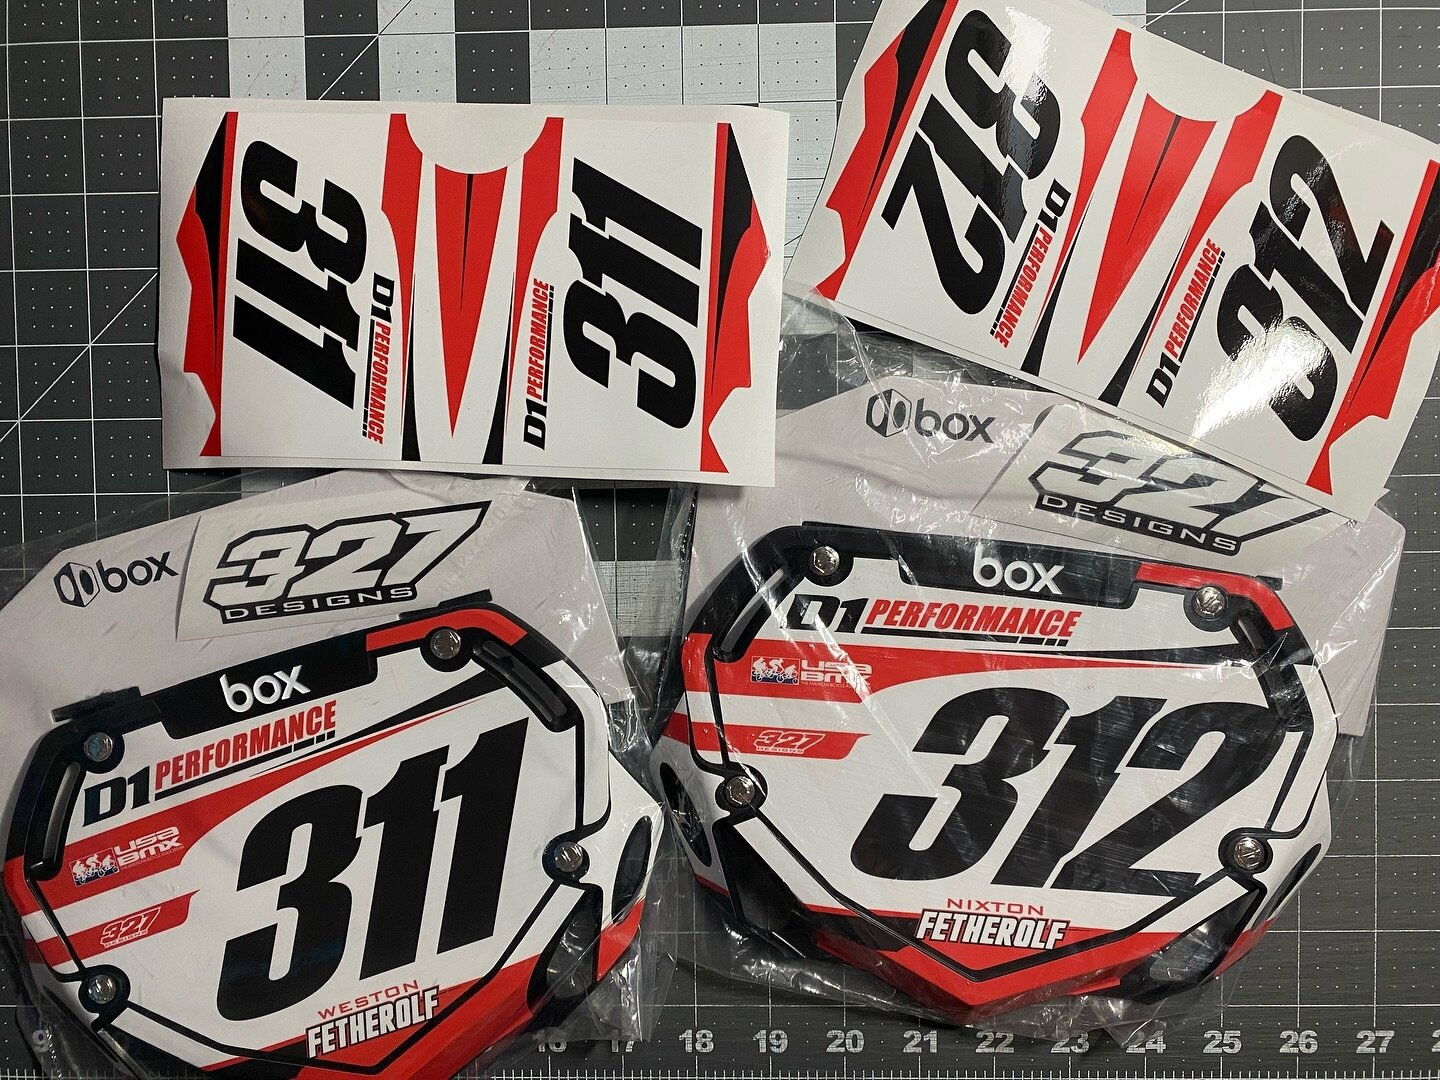 Another set of Full Wraps for the @boxbmx number plates. 

Congrats to the Fetherolf Family for a killer weekend out at the Winter Nationals!

Available on our website 🖥️ 327Designs.com

&mdash;

#bmx #bmxracing #vinyl #usabmx #designs #racing #bike